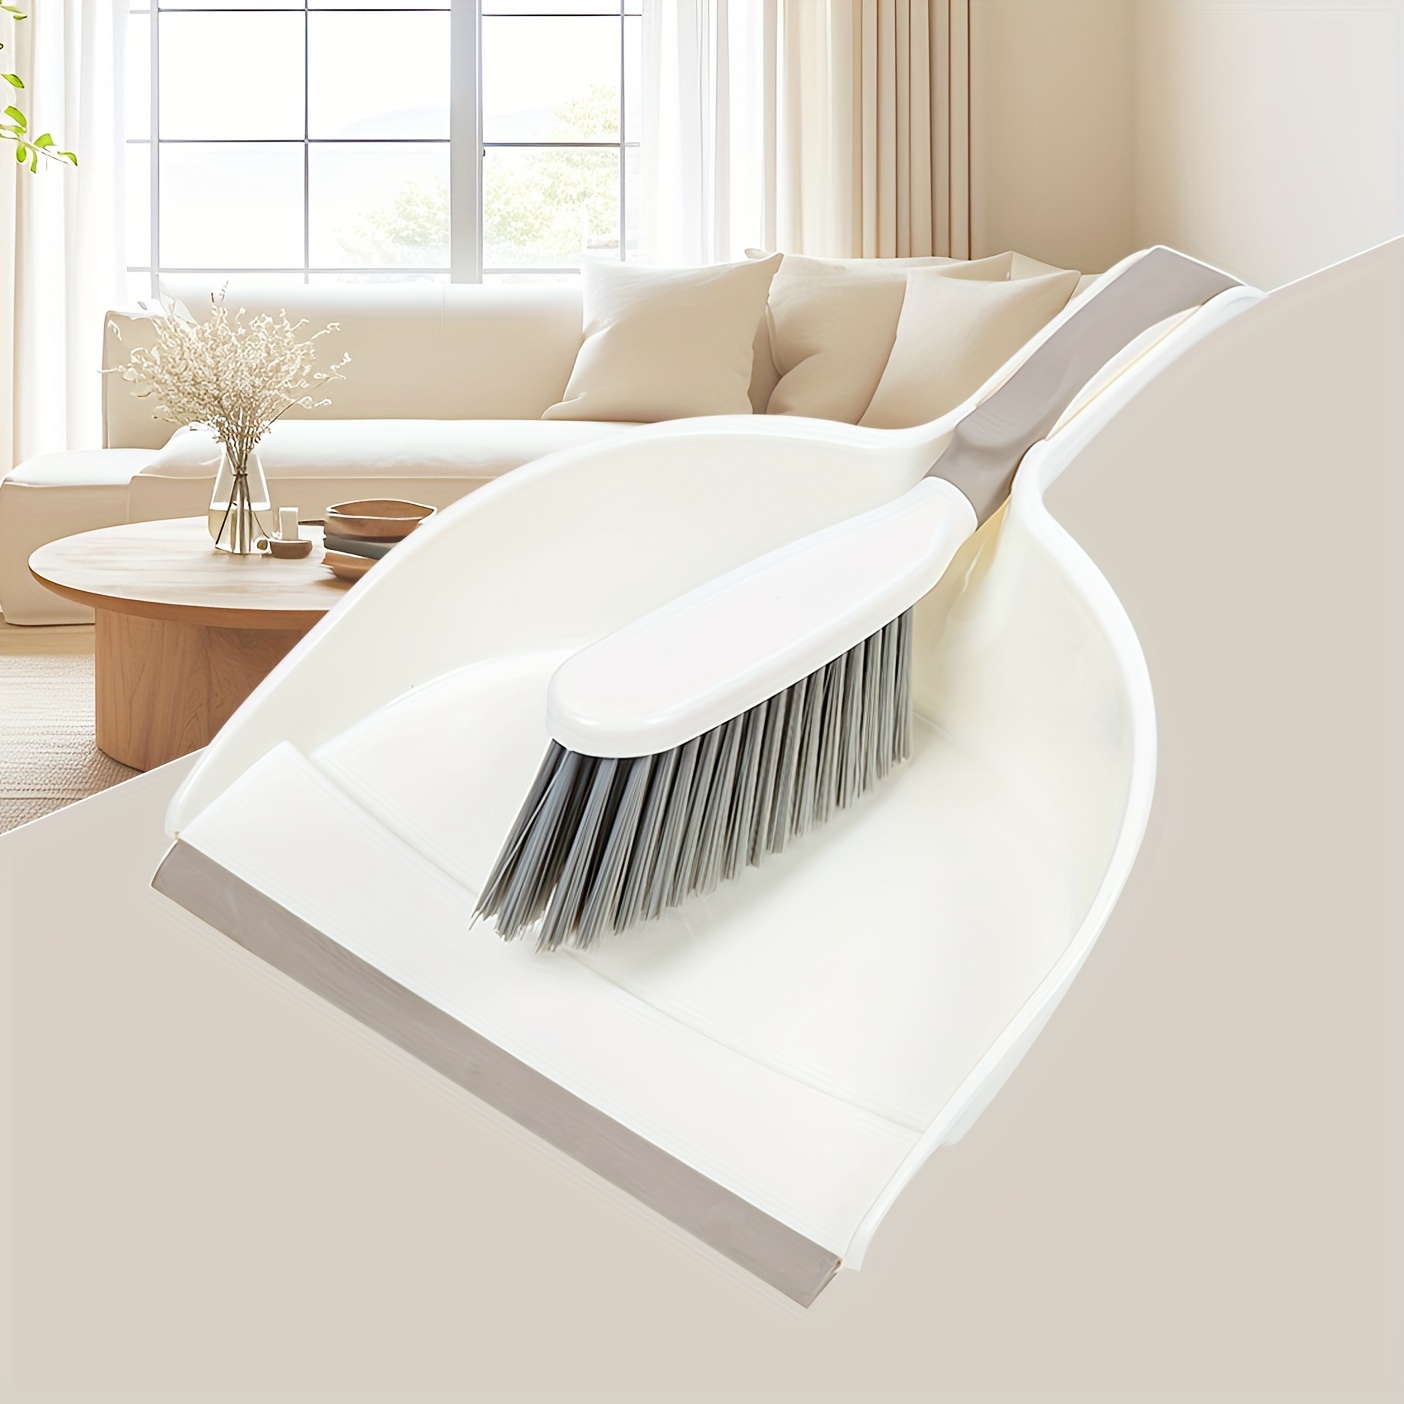 

1pc, 2-in-1 Handheld Broom And Dustpan Set, Compact Cleaning Brush, Dust Collector, Easy Storage For Kitchen Tabletops, Pet Cage Cleaning